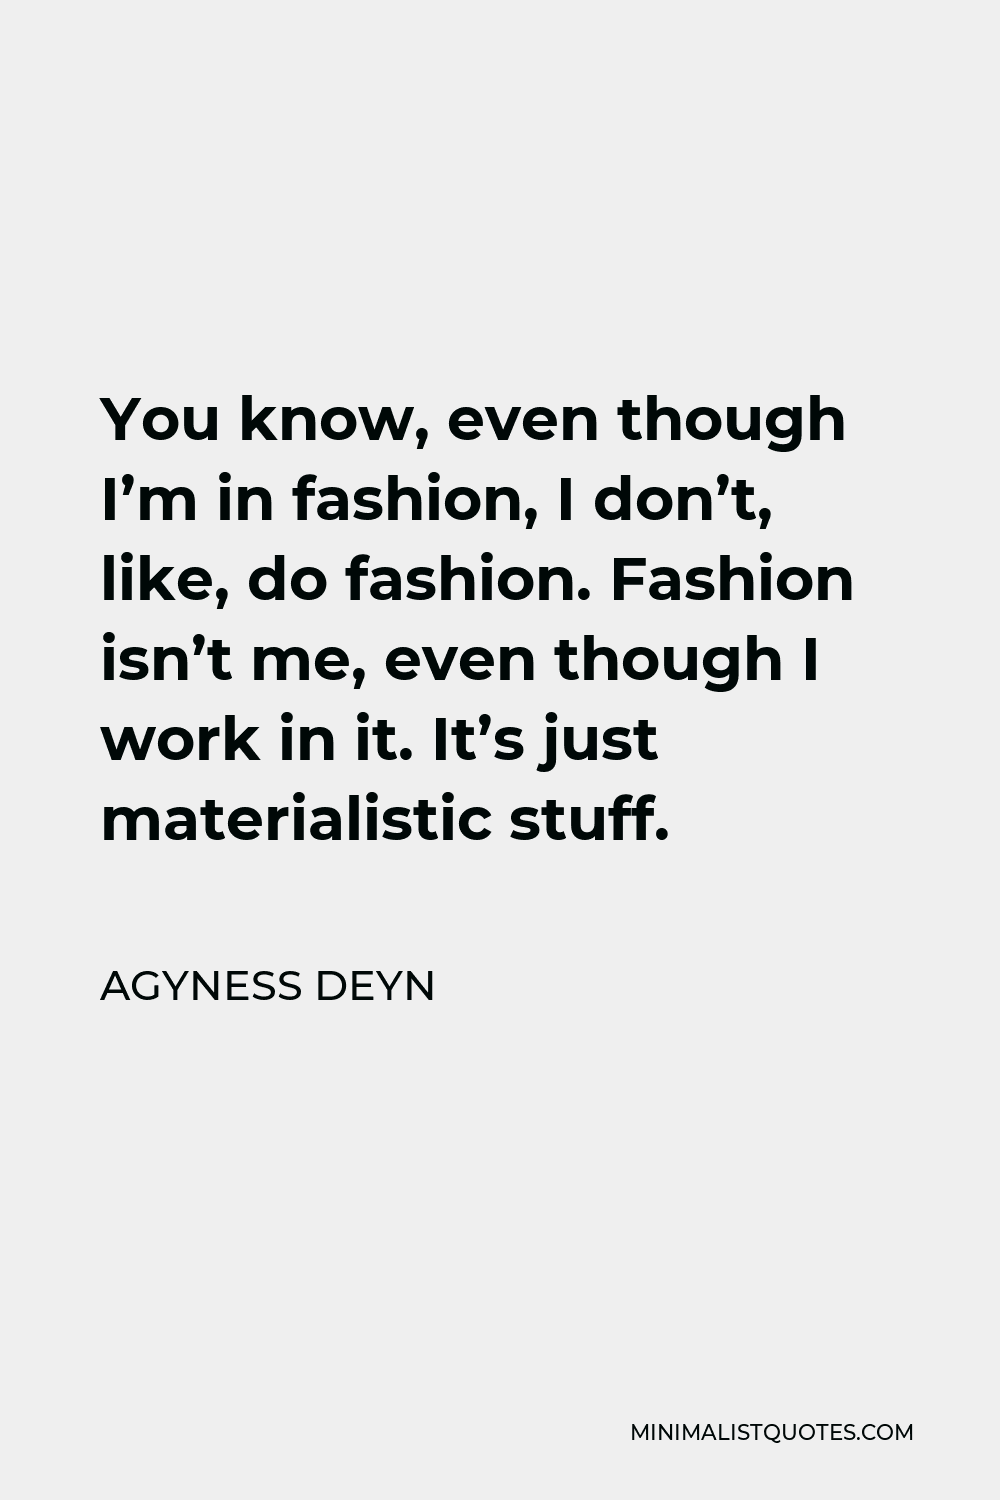 Agyness Deyn Quote - You know, even though I’m in fashion, I don’t, like, do fashion. Fashion isn’t me, even though I work in it. It’s just materialistic stuff.